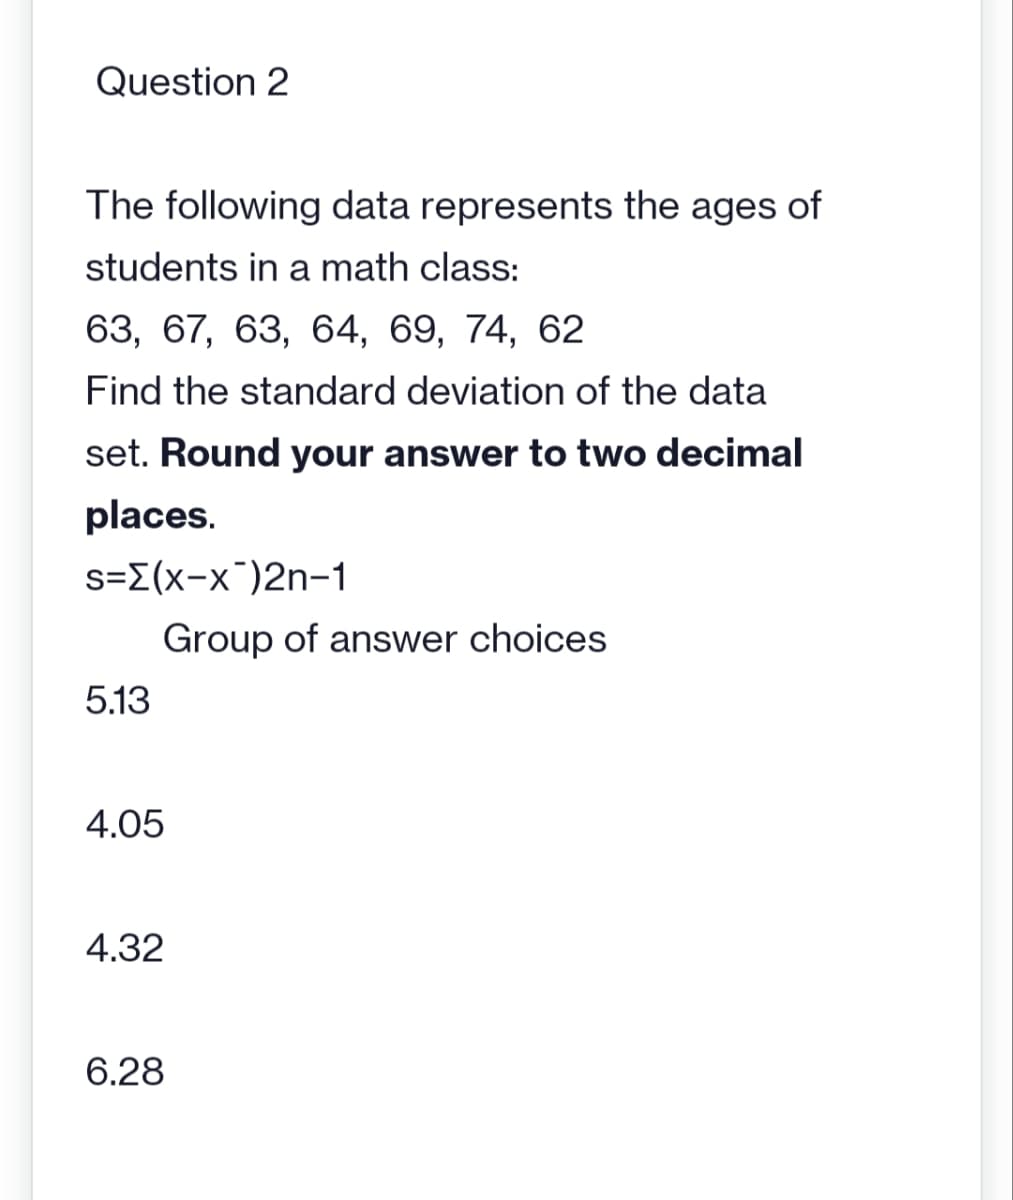 Question 2
The following data represents the ages of
students in a math class:
63, 67, 63, 64, 69, 74, 62
Find the standard deviation of the data
set. Round your answer to two decimal
places.
s={(x-x)2n-1
5.13
Group of answer choices
4.05
4.32
6.28